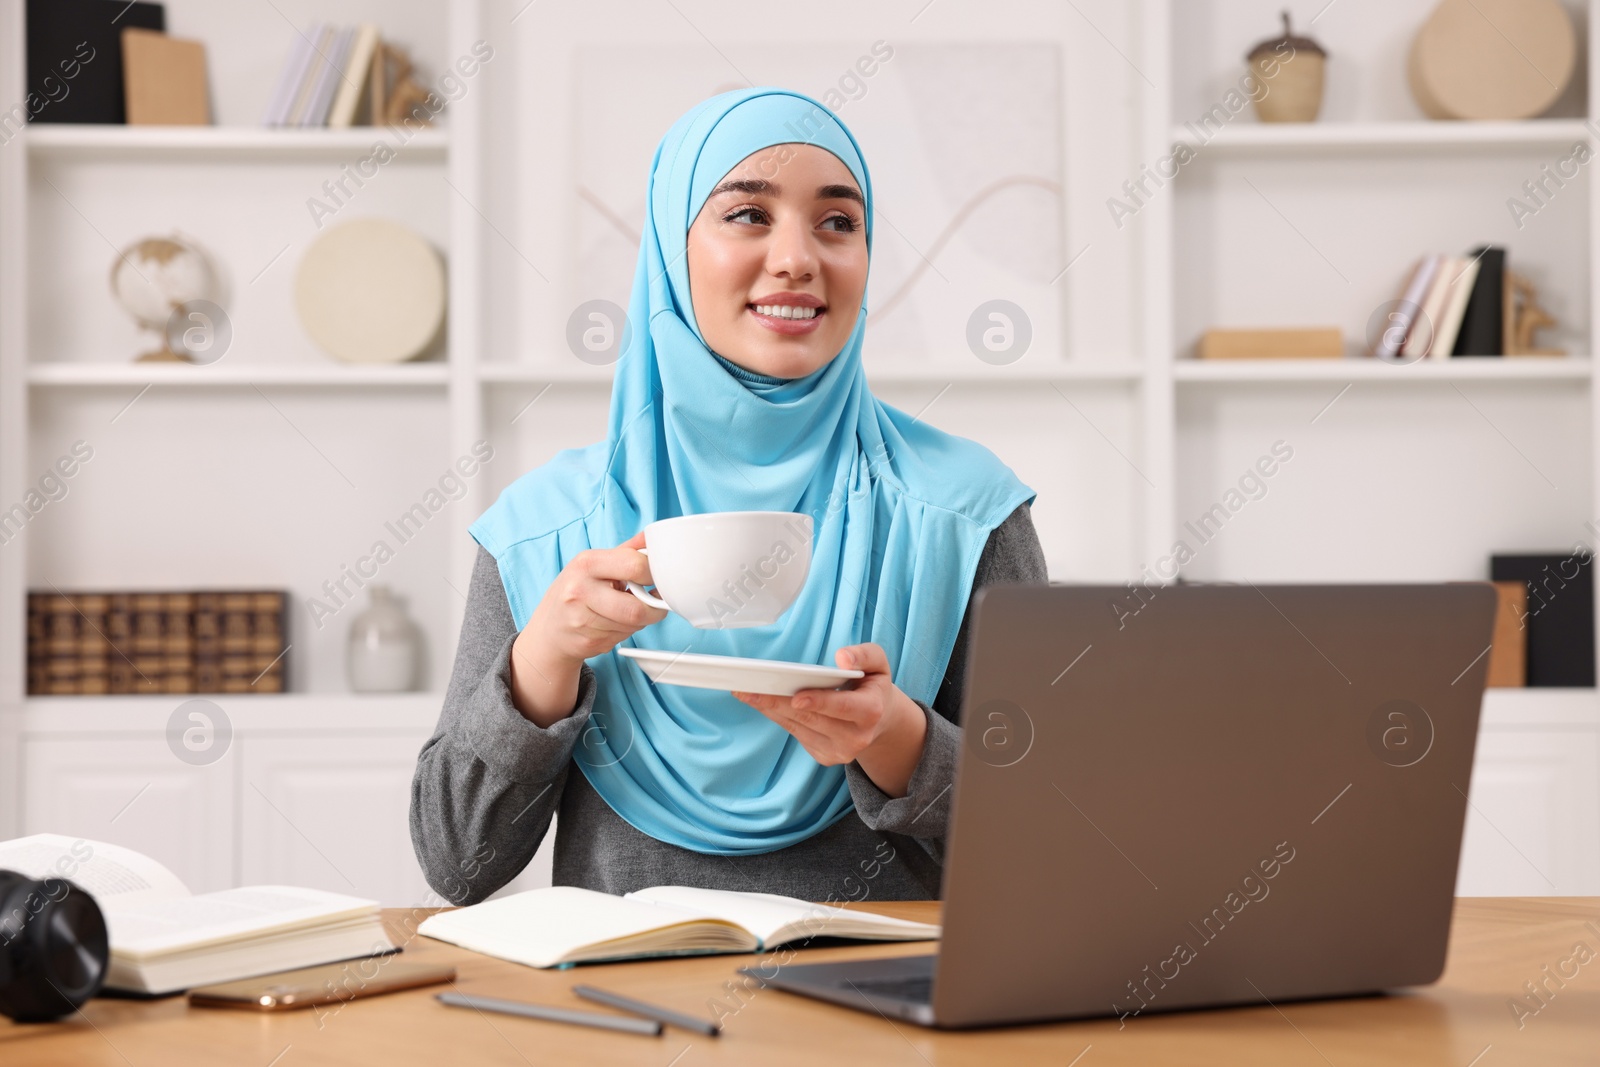 Photo of Muslim woman in hijab with cup of coffee using laptop at wooden table in room